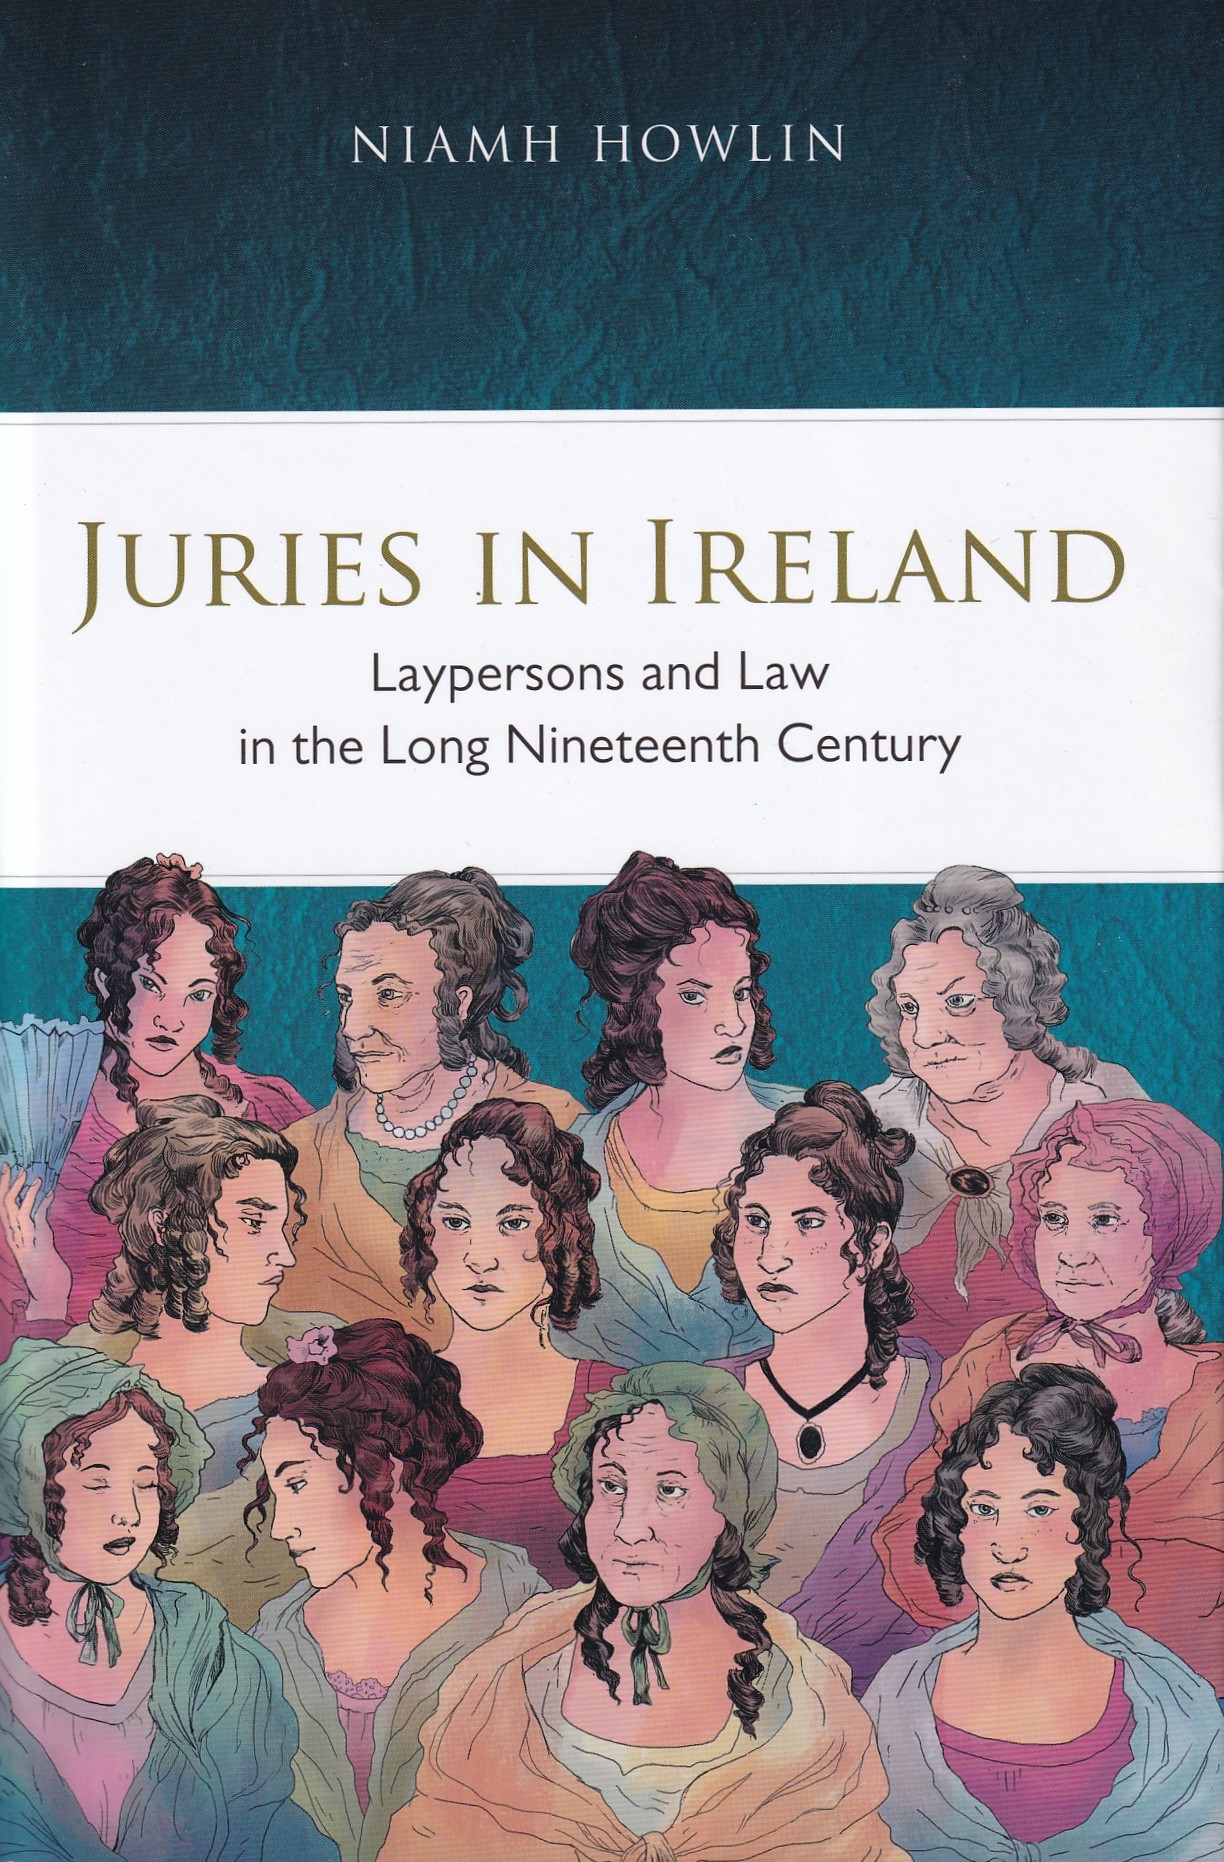 Juries in Ireland: Laypersons and Law in the Long Nineteenth Century by Niamh Howlin